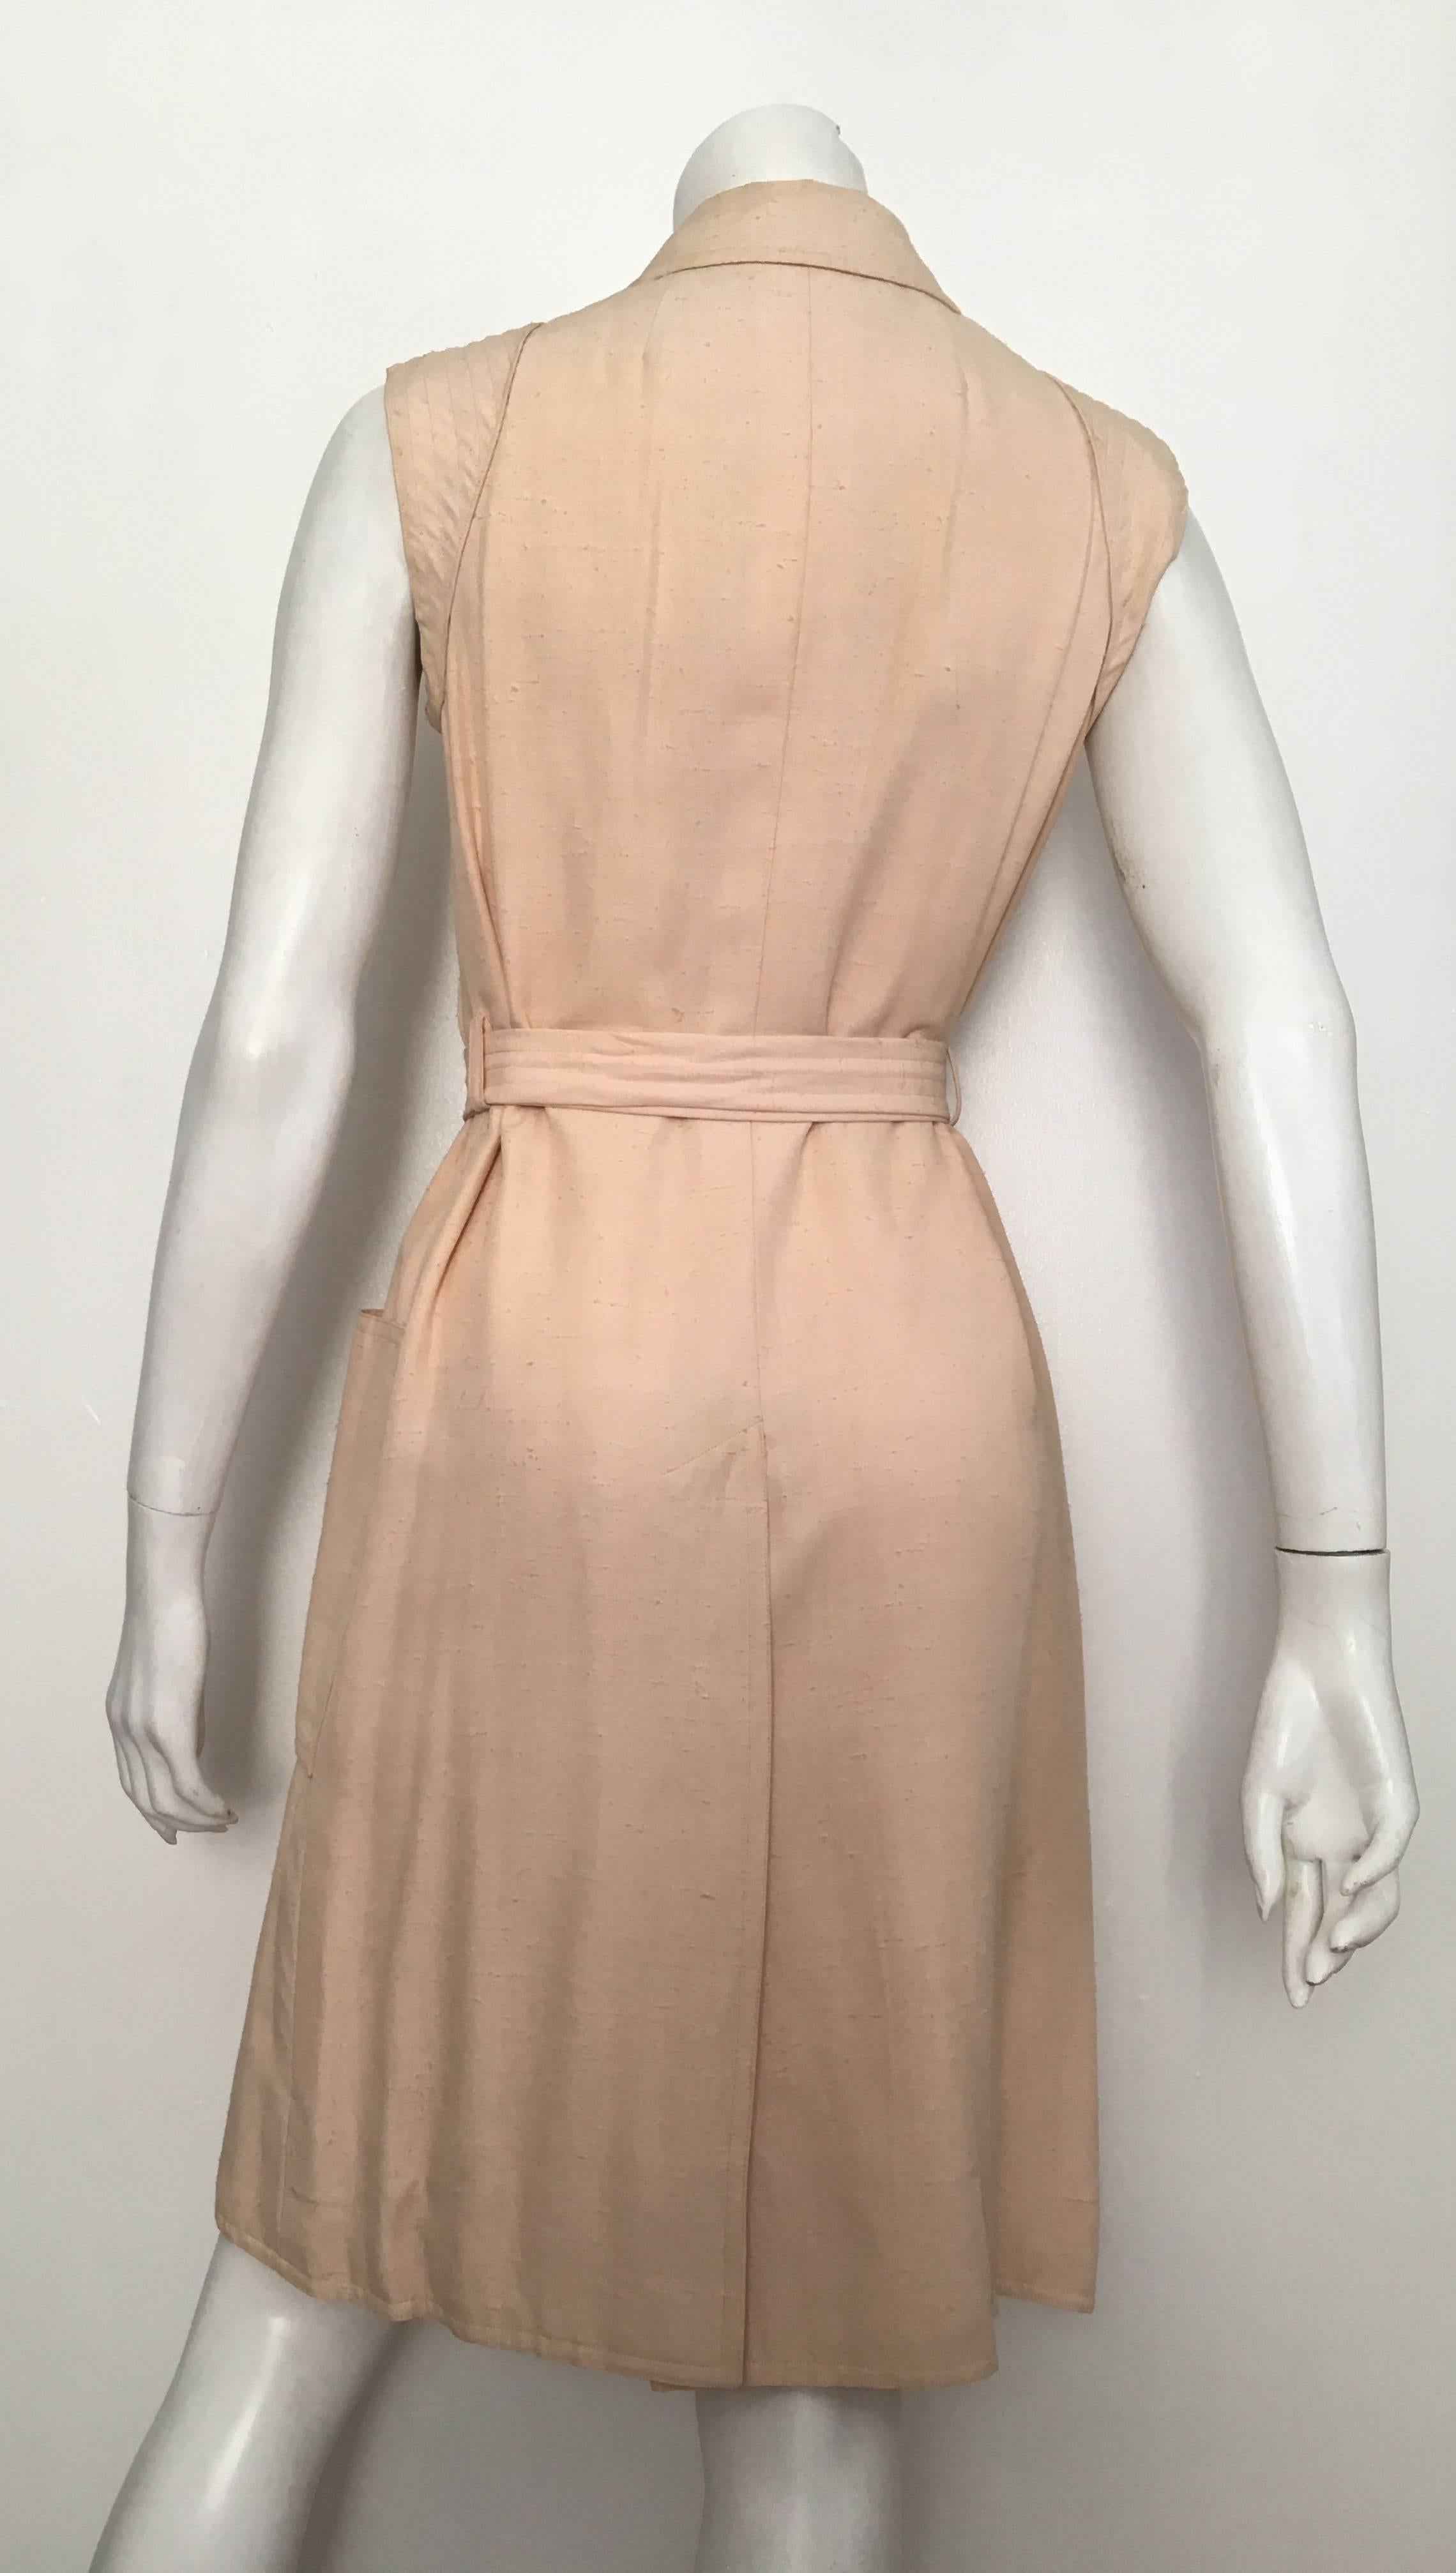 Geoffrey Beene for Neiman Marcus 1970s Silk Button Up Dress with Pockets Size 8. For Sale 1